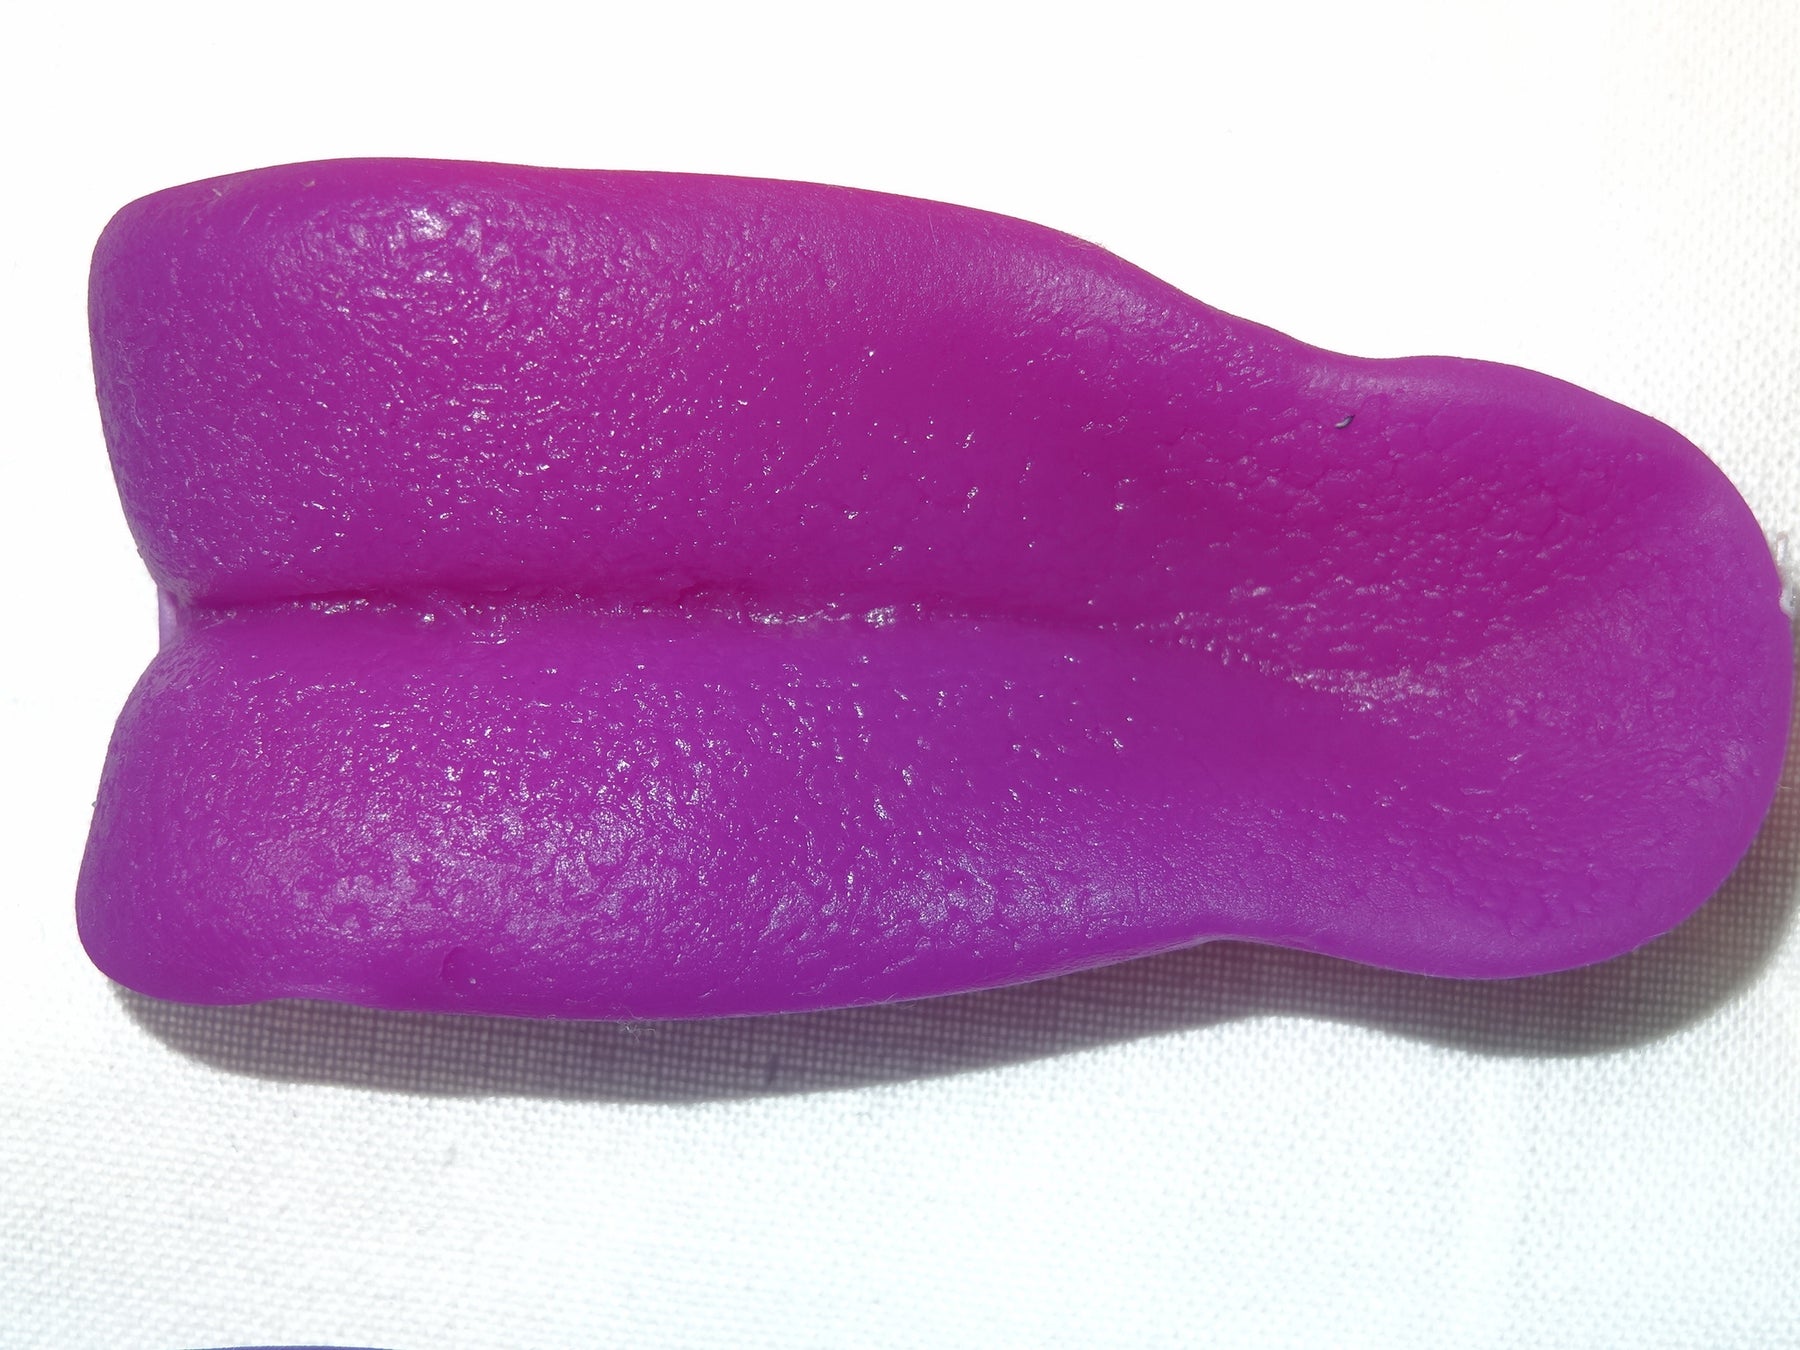 Silicone JW Velociraptor Tongue – DreamVision Creations